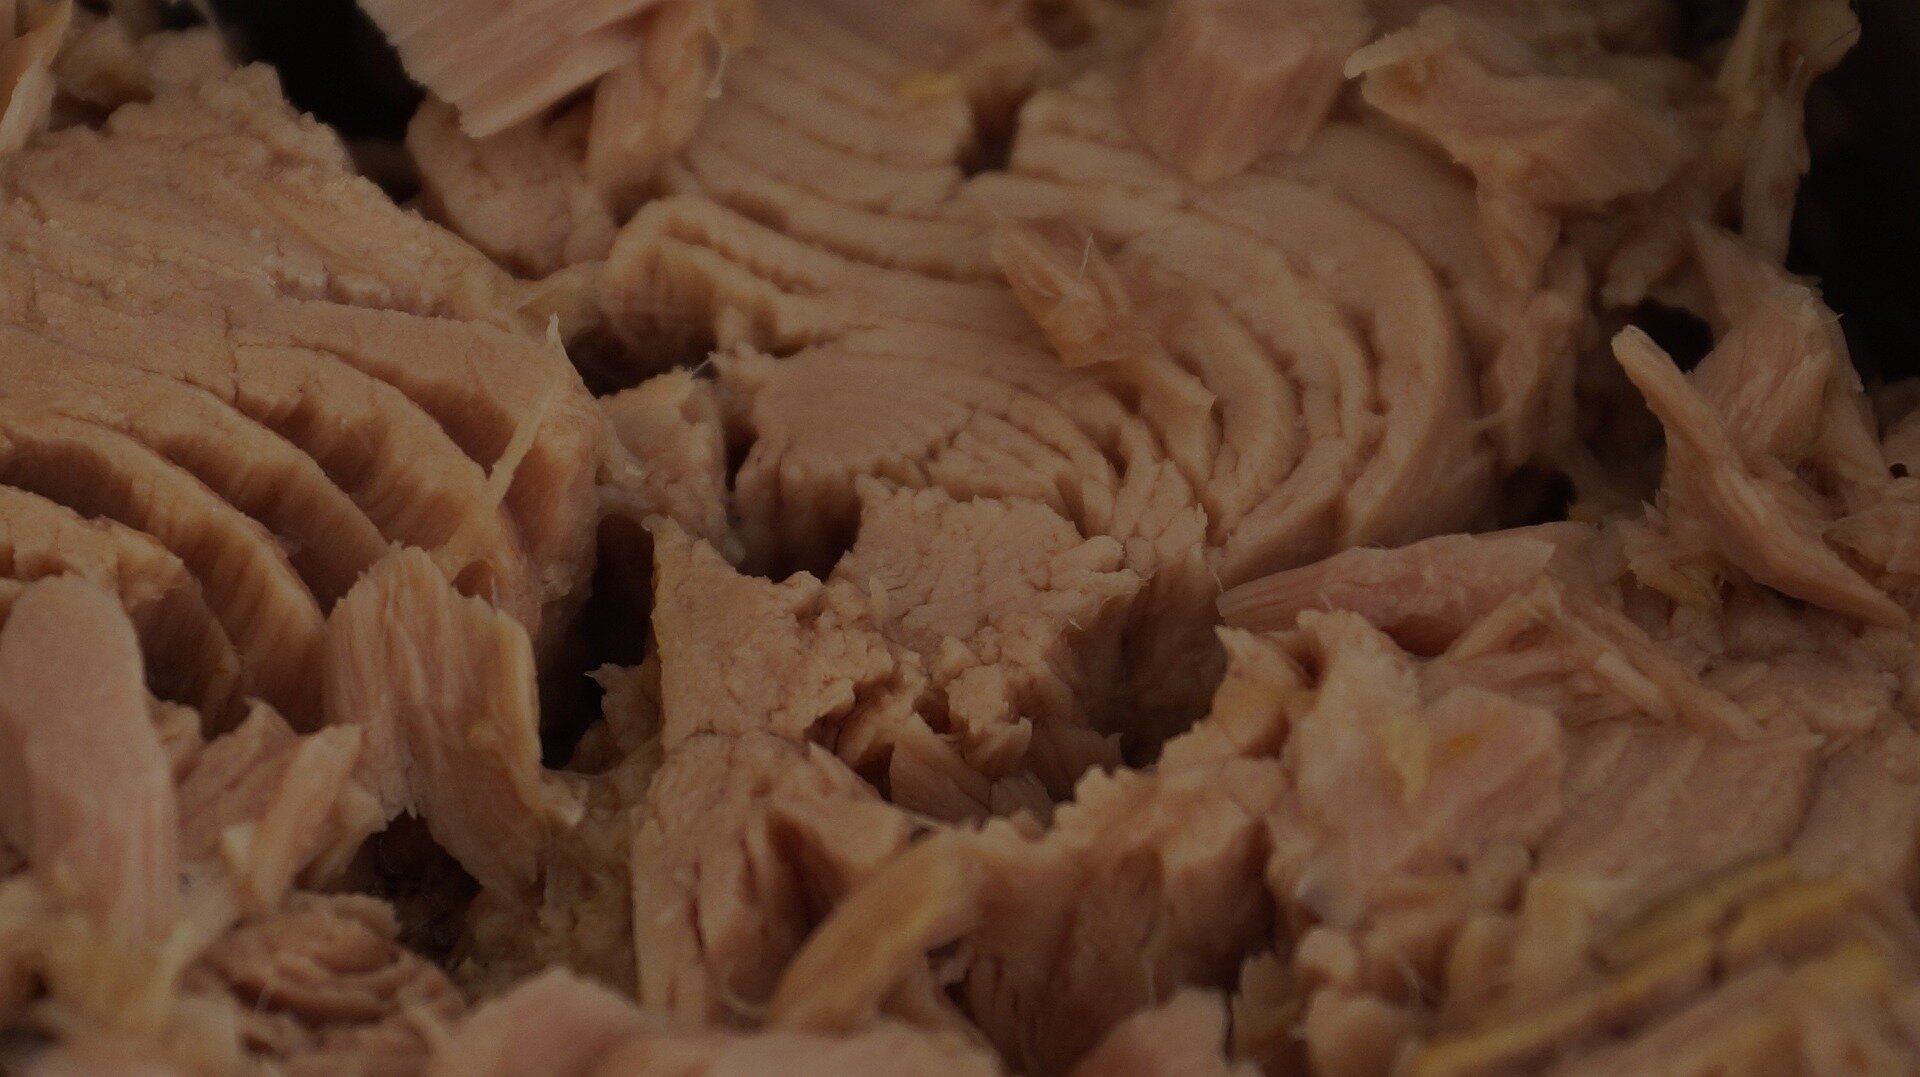 Mercury levels in tuna remain nearly unchanged since 1971, study says